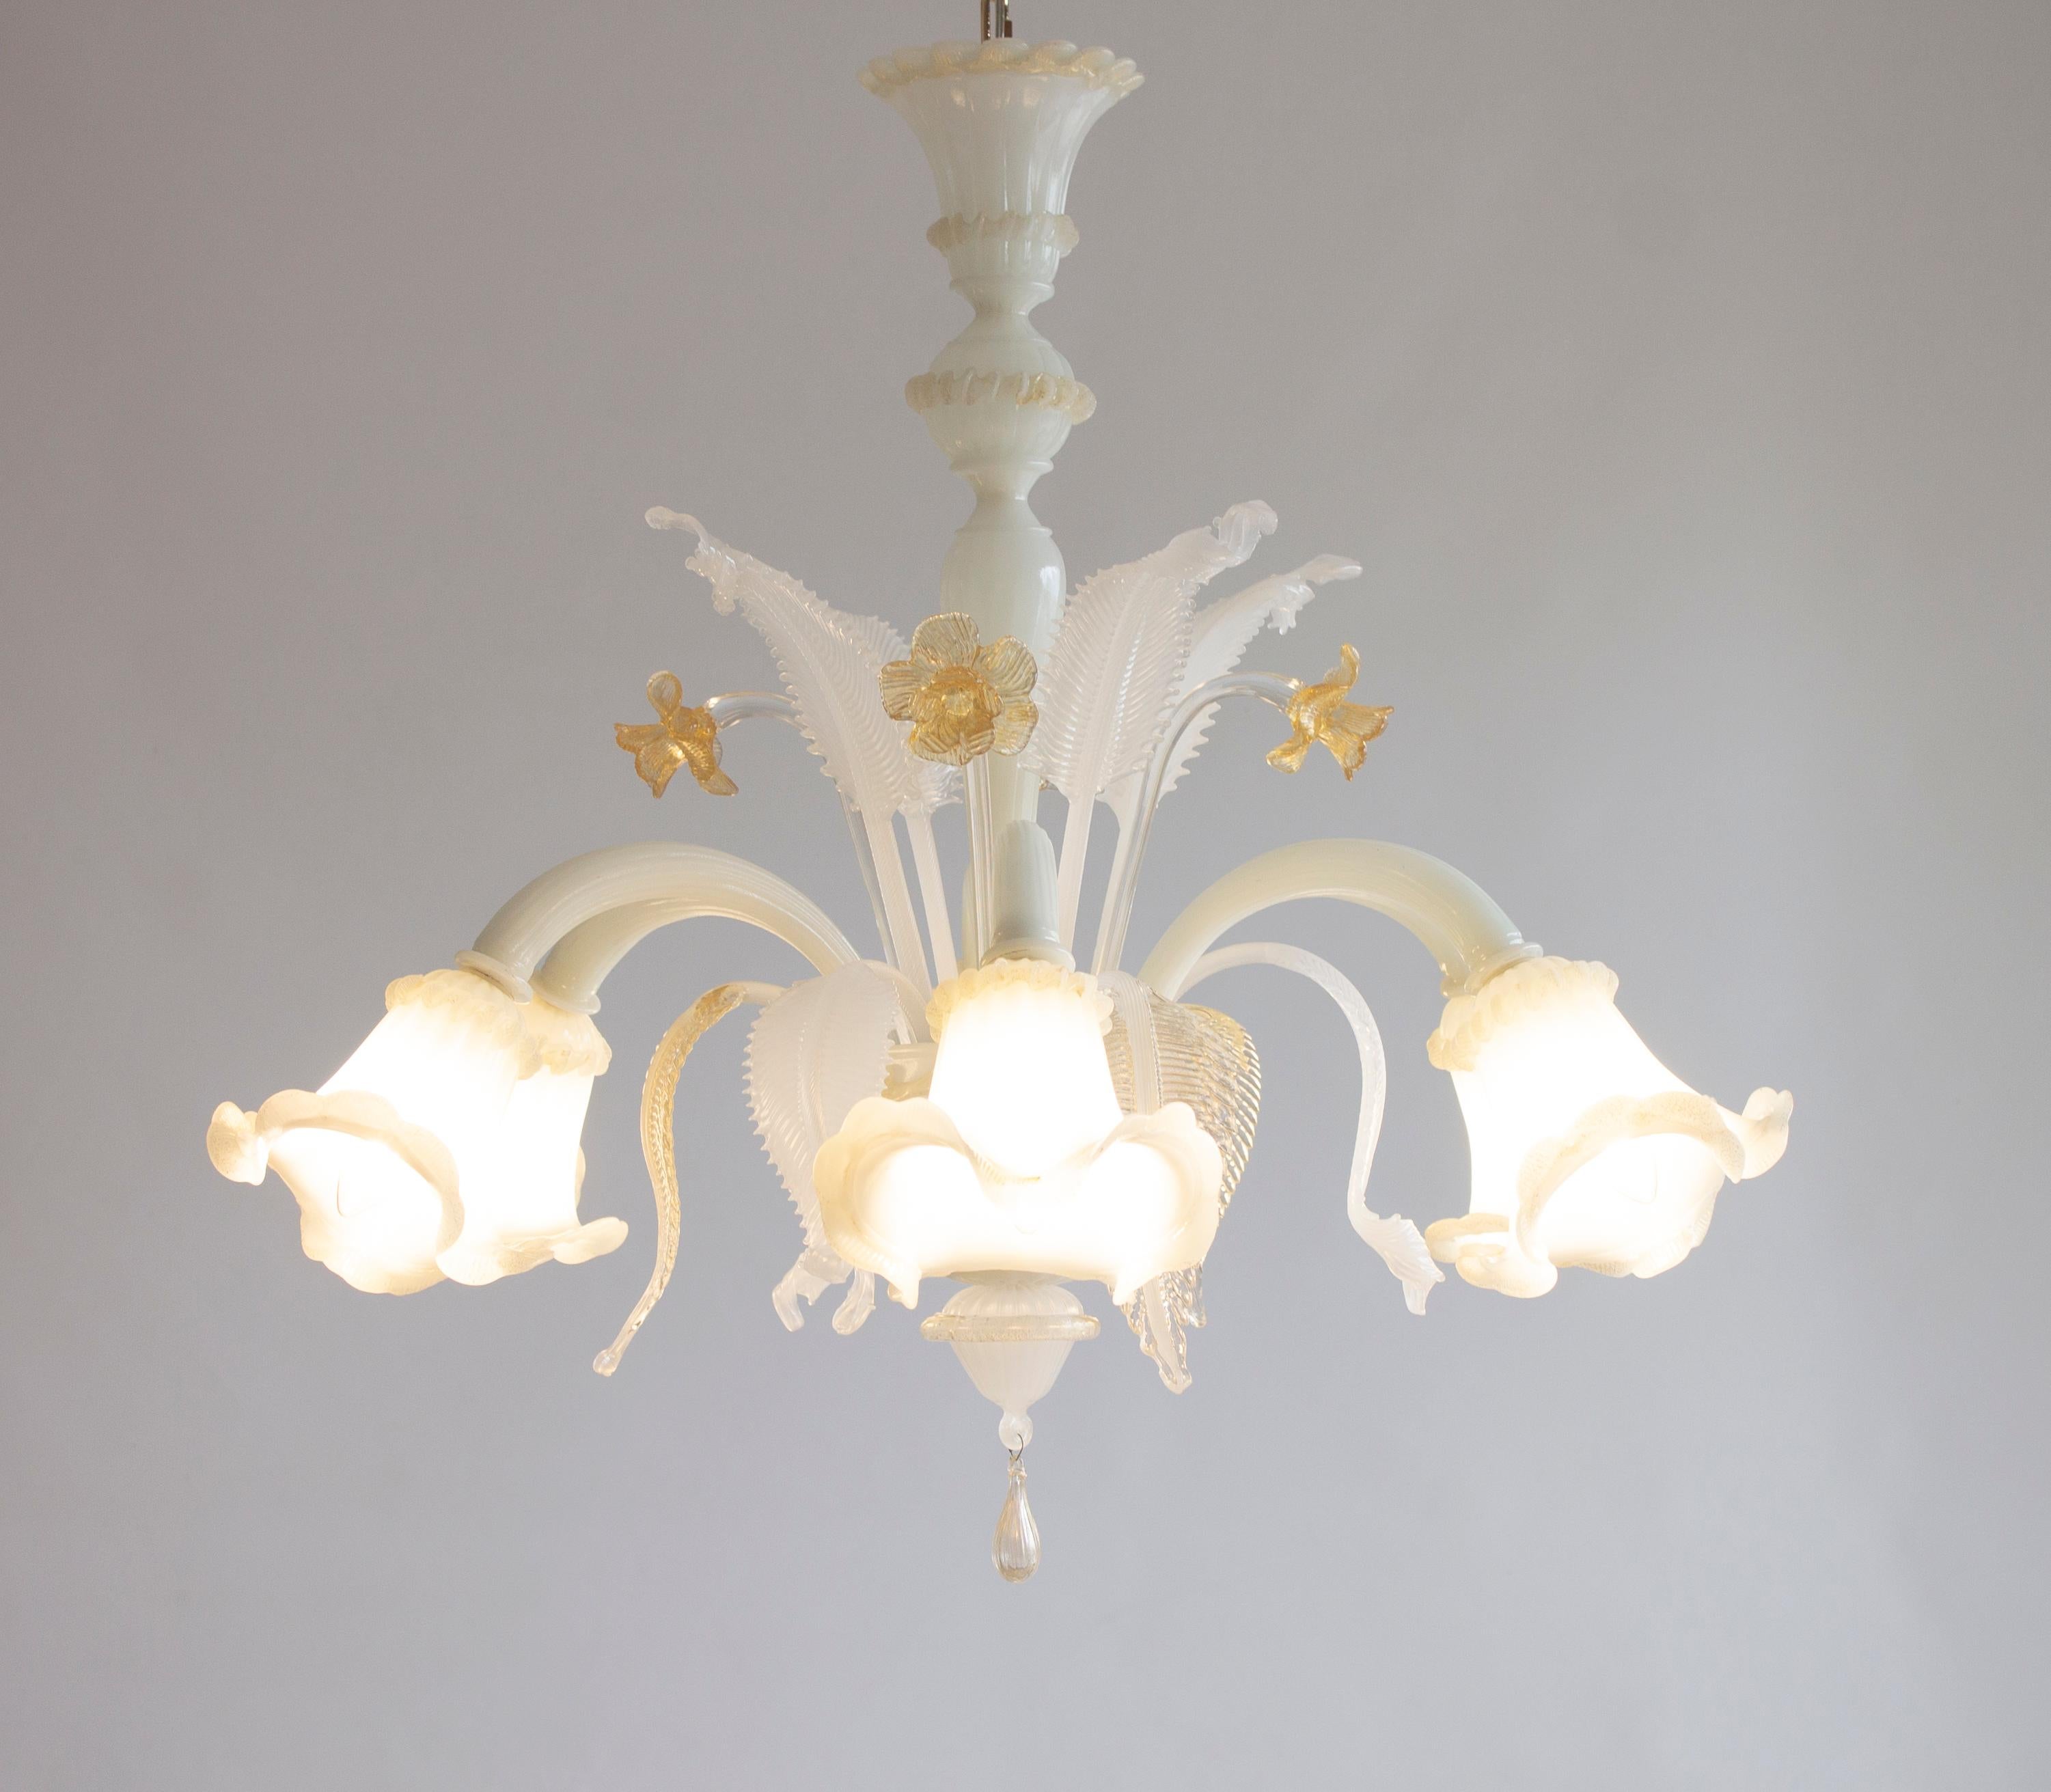 Hand-Crafted 20th Century Floral Chandelier in Silk-and-amber-colored Murano Glass, with Gold For Sale